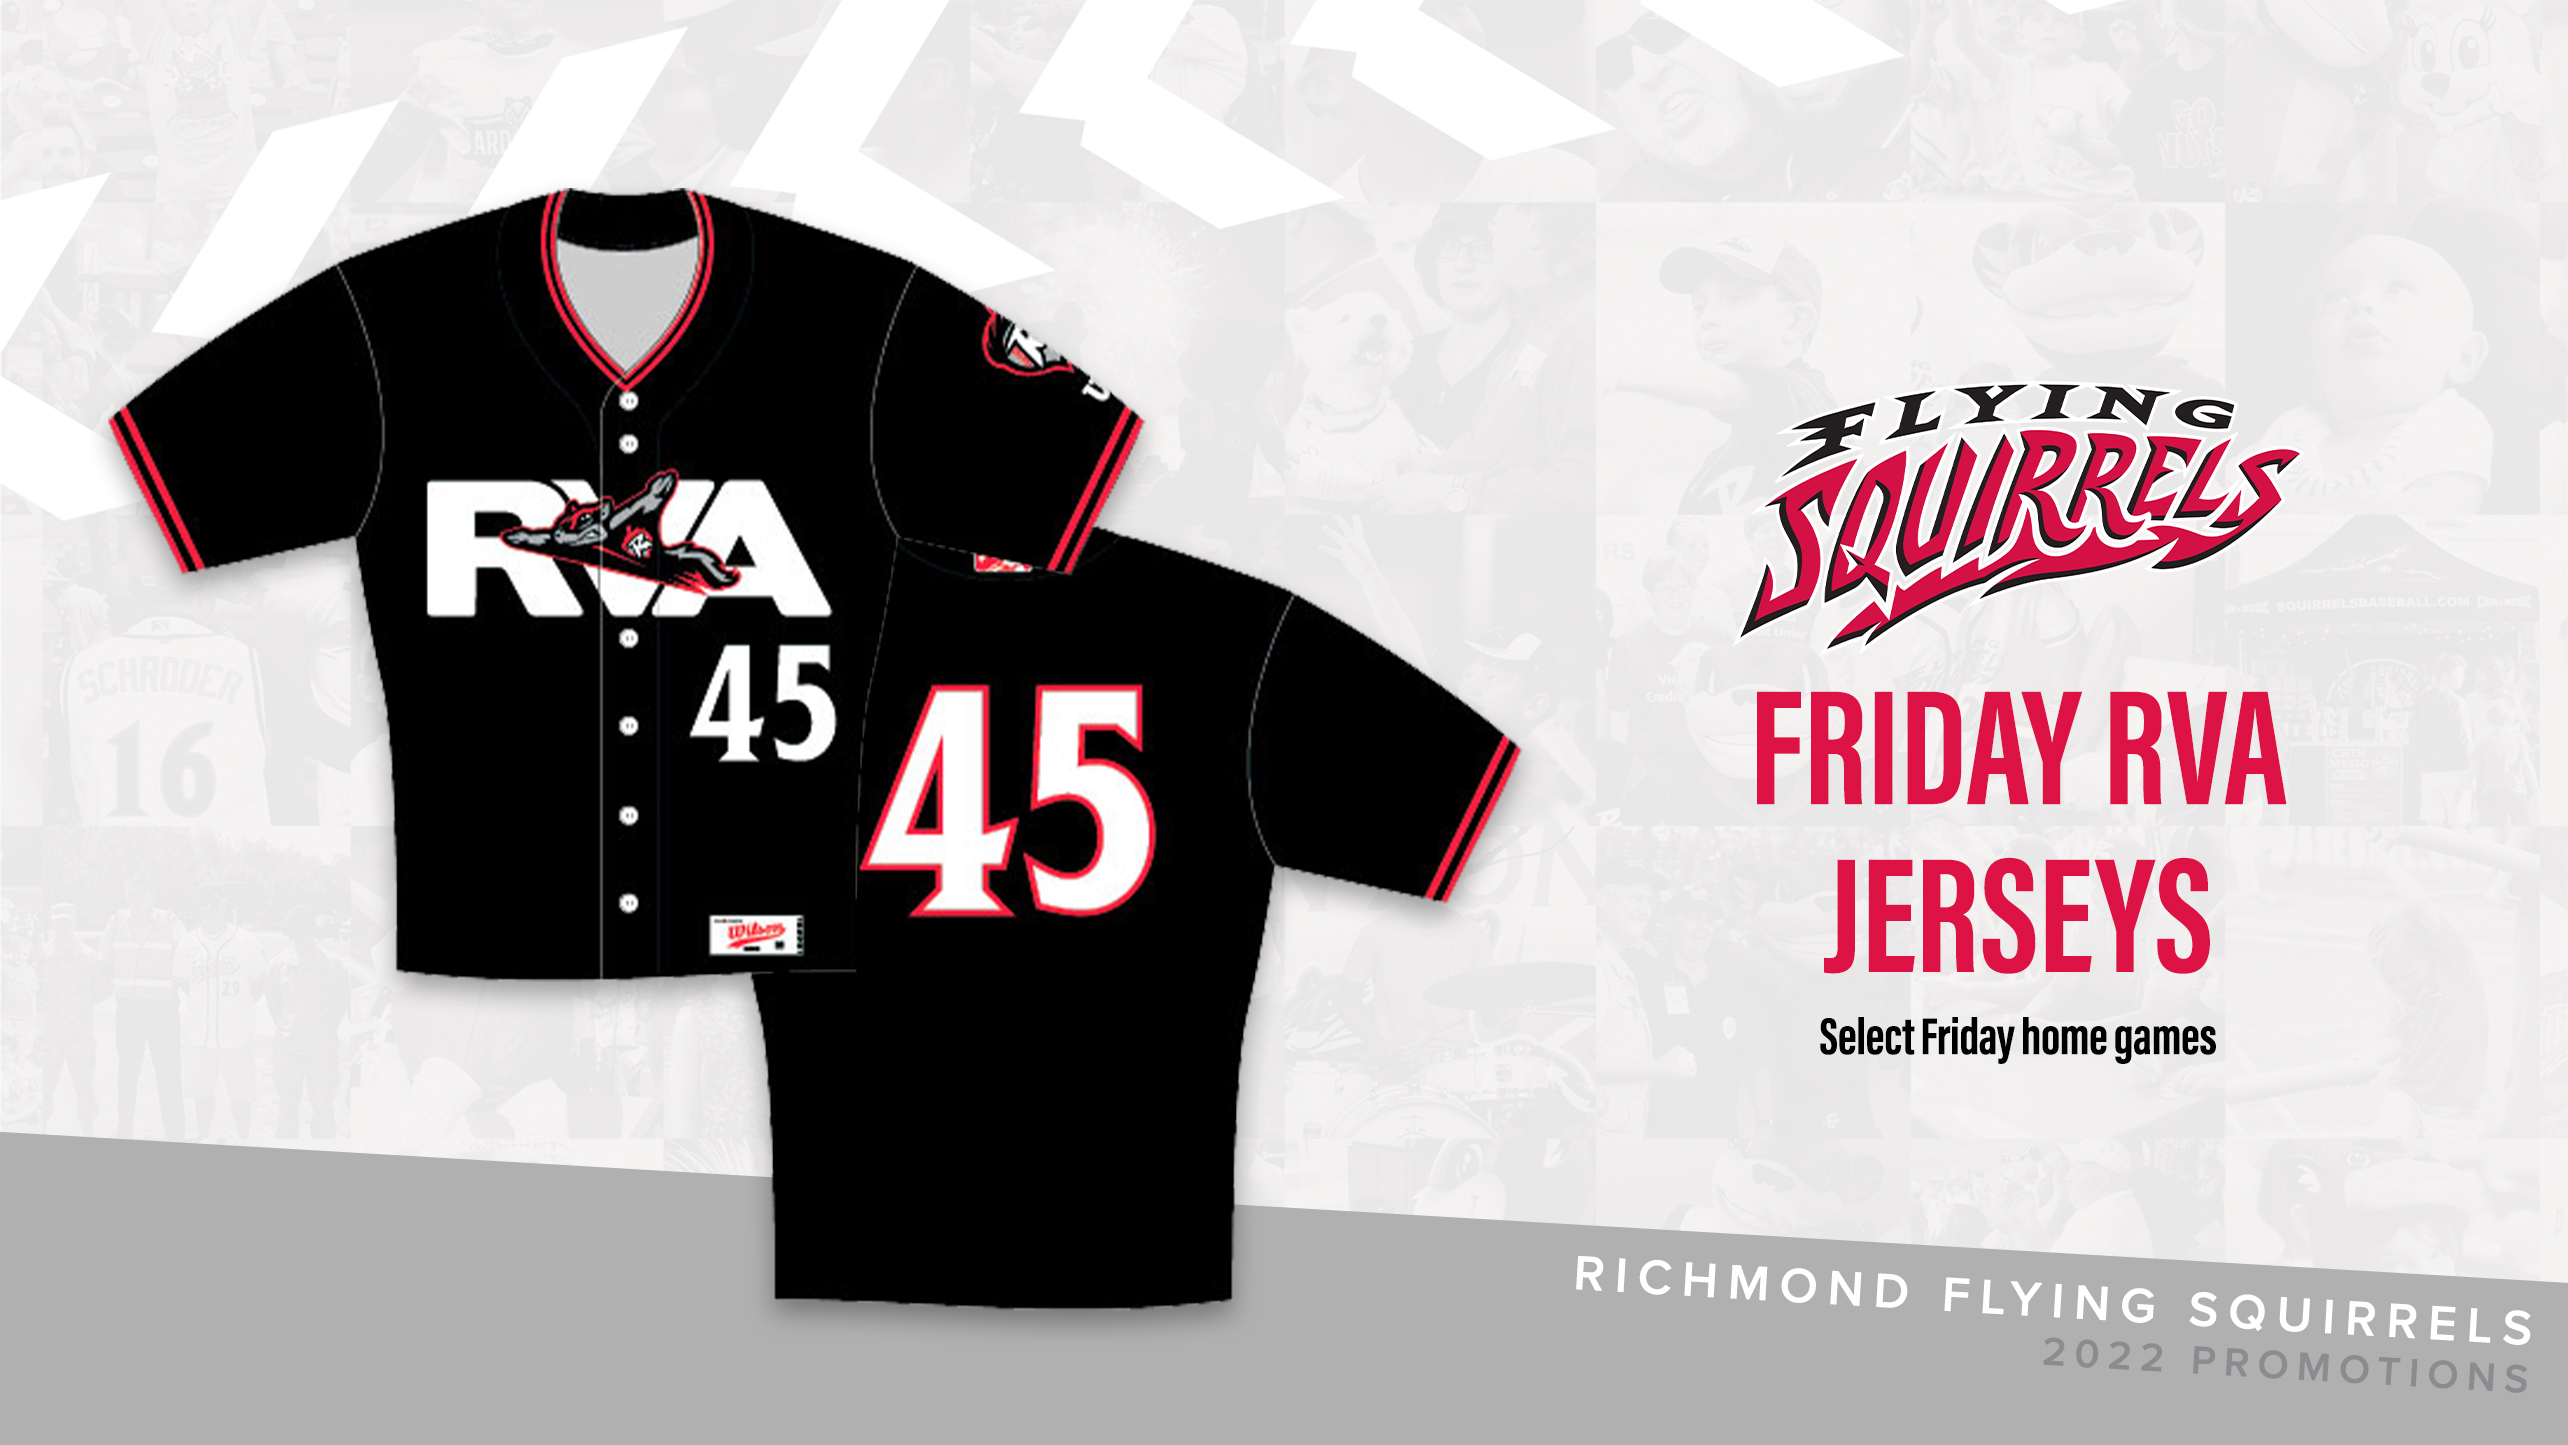 Flying Squirrels release 2022 promotional schedule